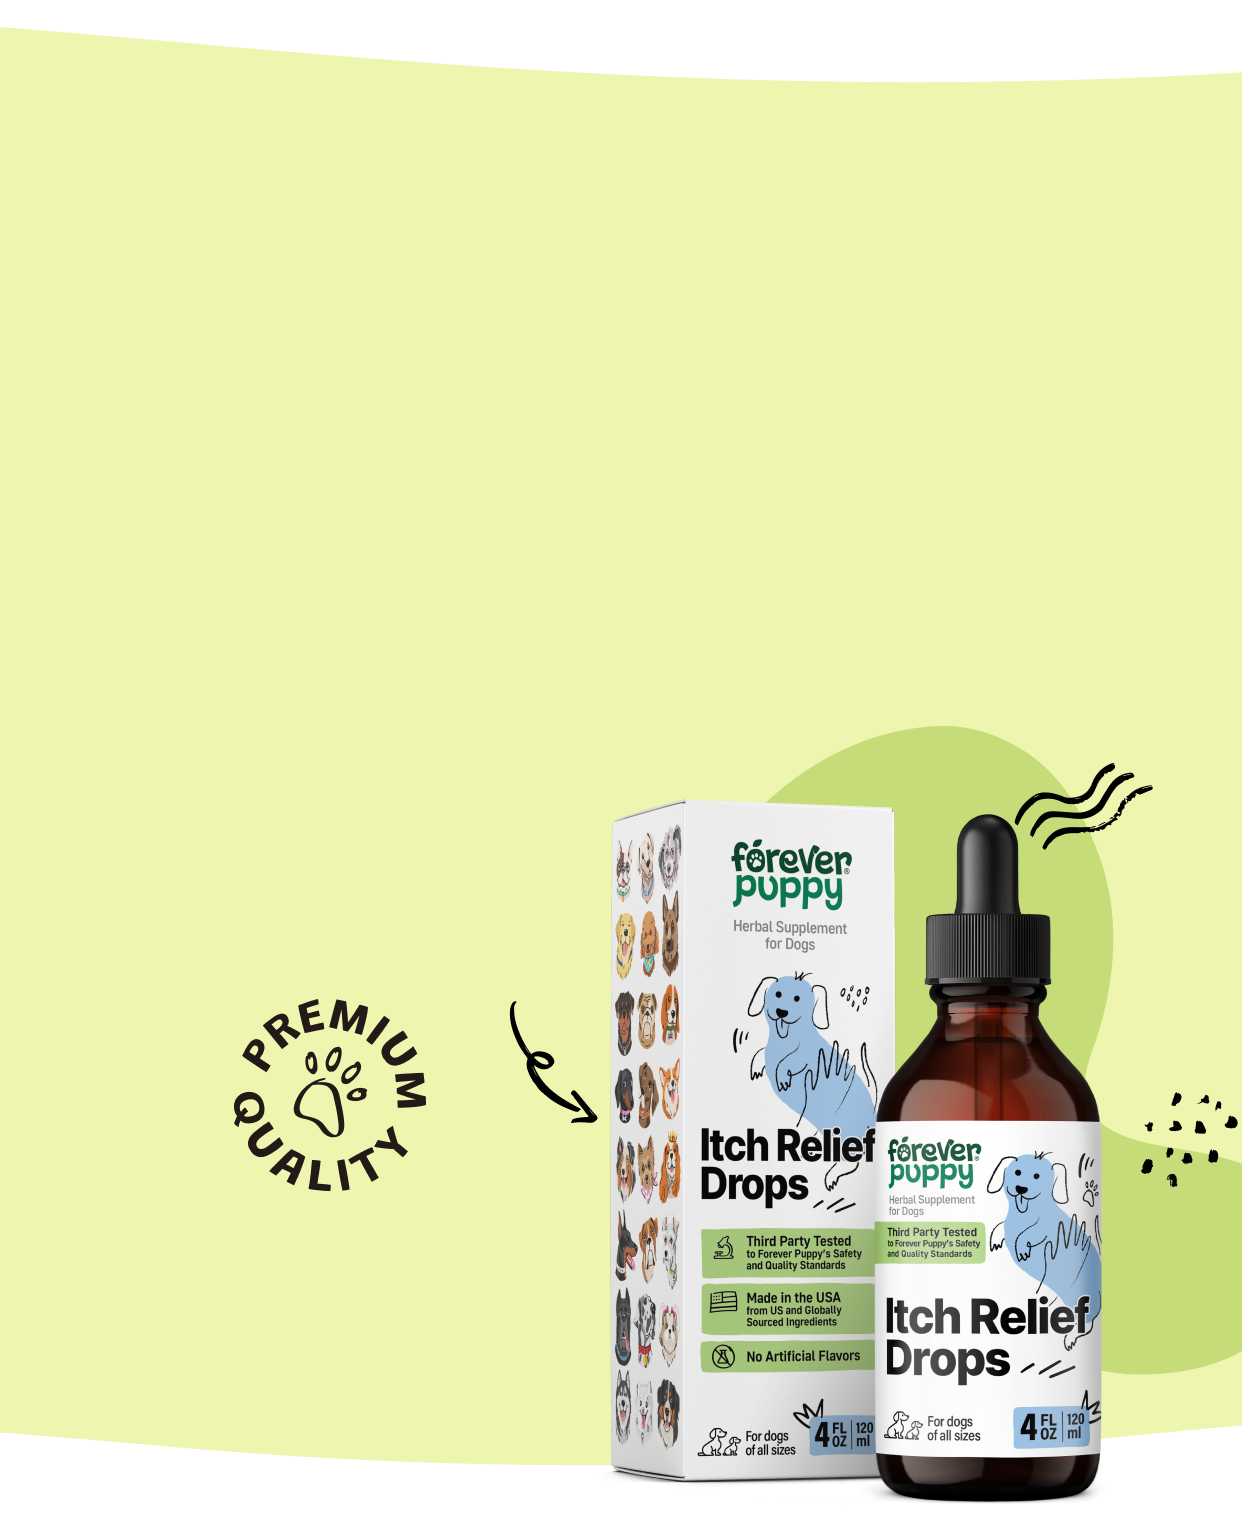 Soothe your dog's itchy skin